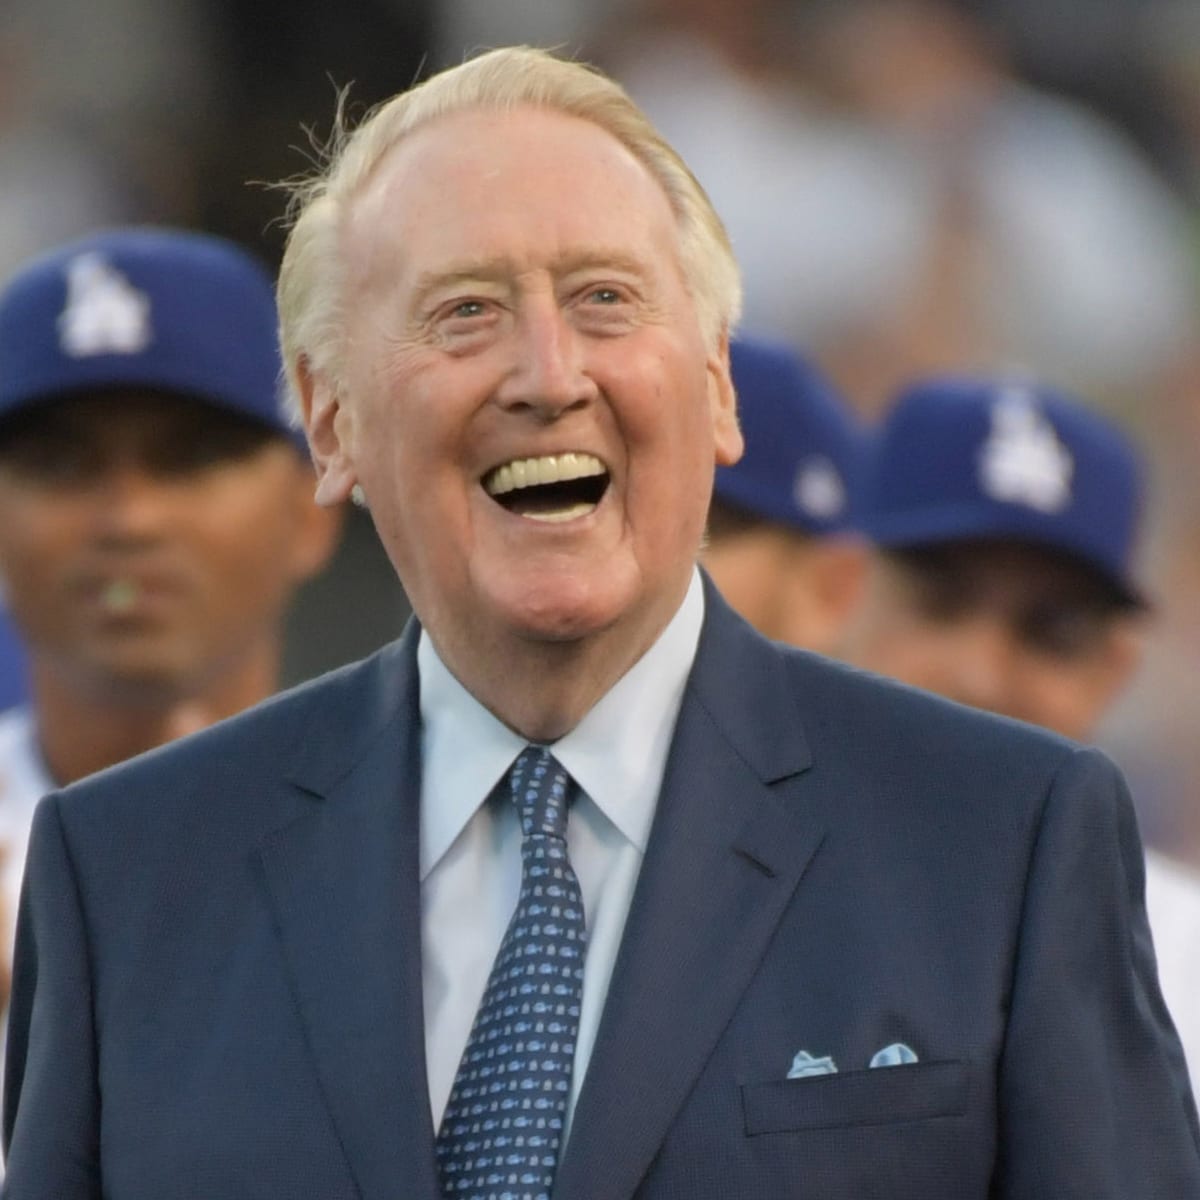 Highlight] Vin Scully's Masterful Call of the 10th Inning of Game